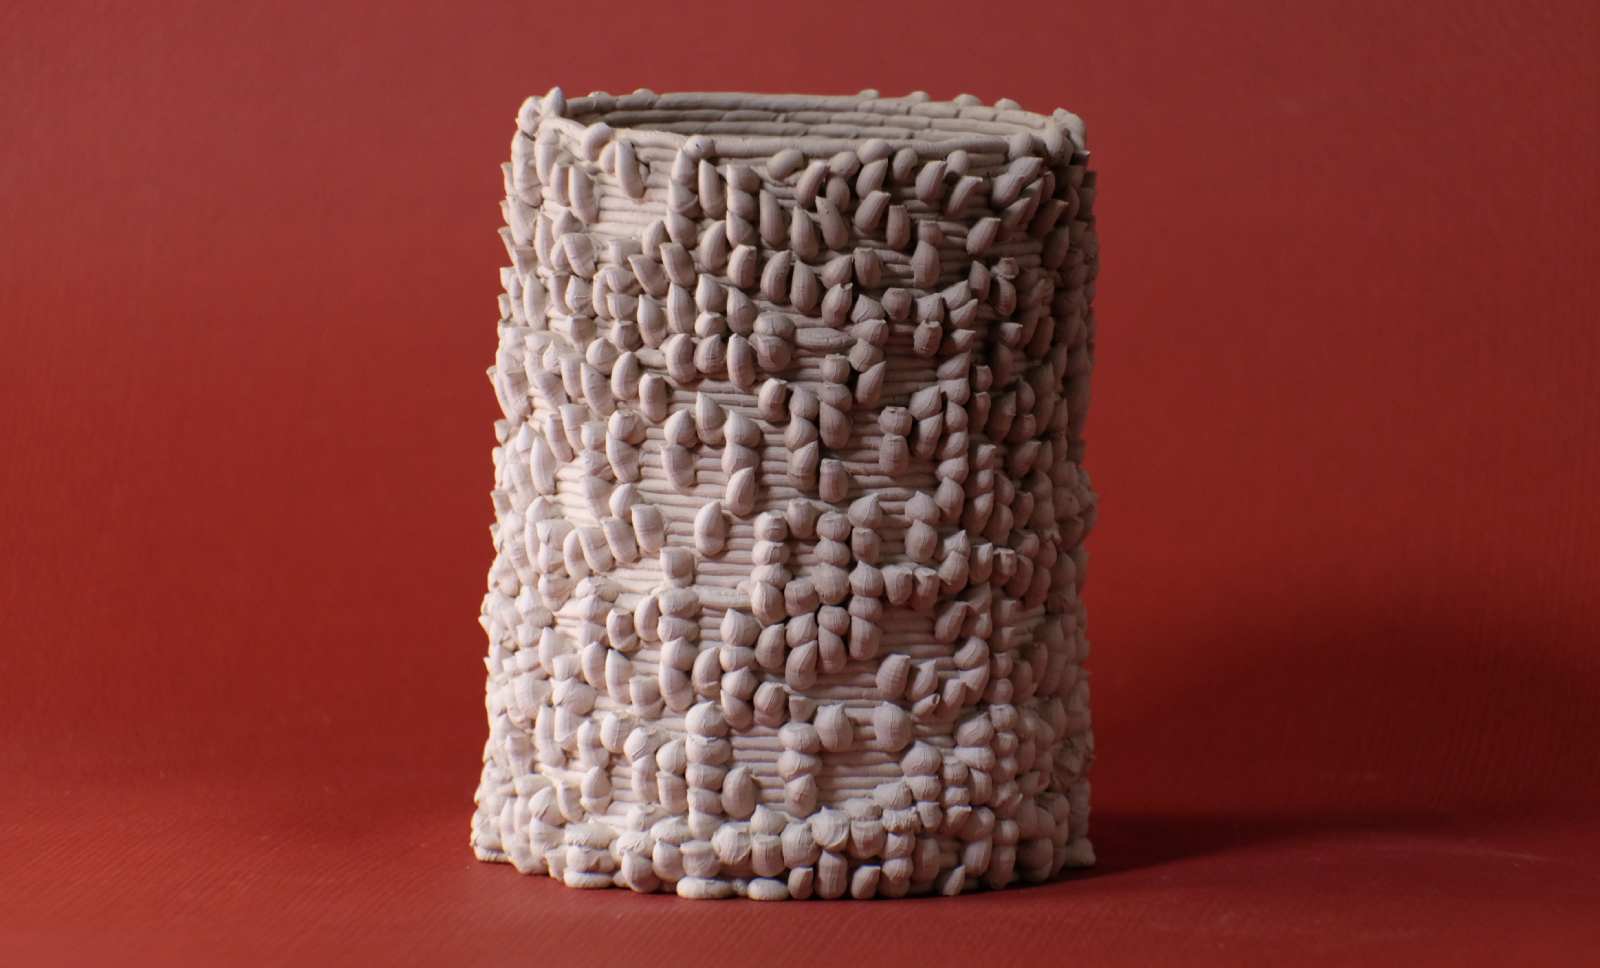 A porcelain cylindrical piece with a texture resembling small, numerous nubs coming out in random places.